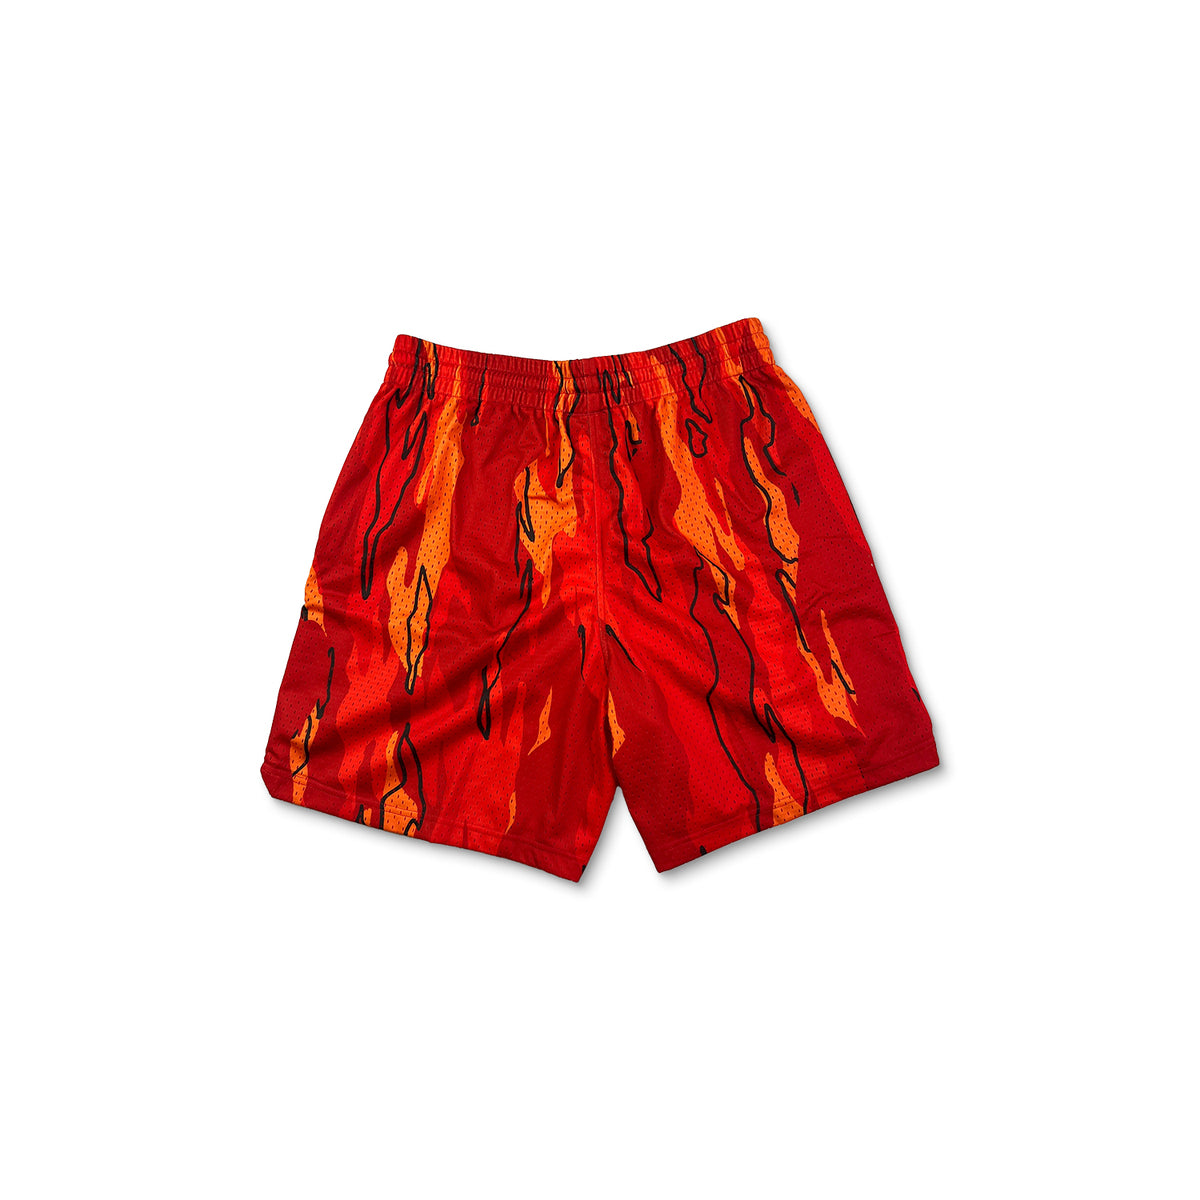 Camo Basketball Shorts - Red Flame